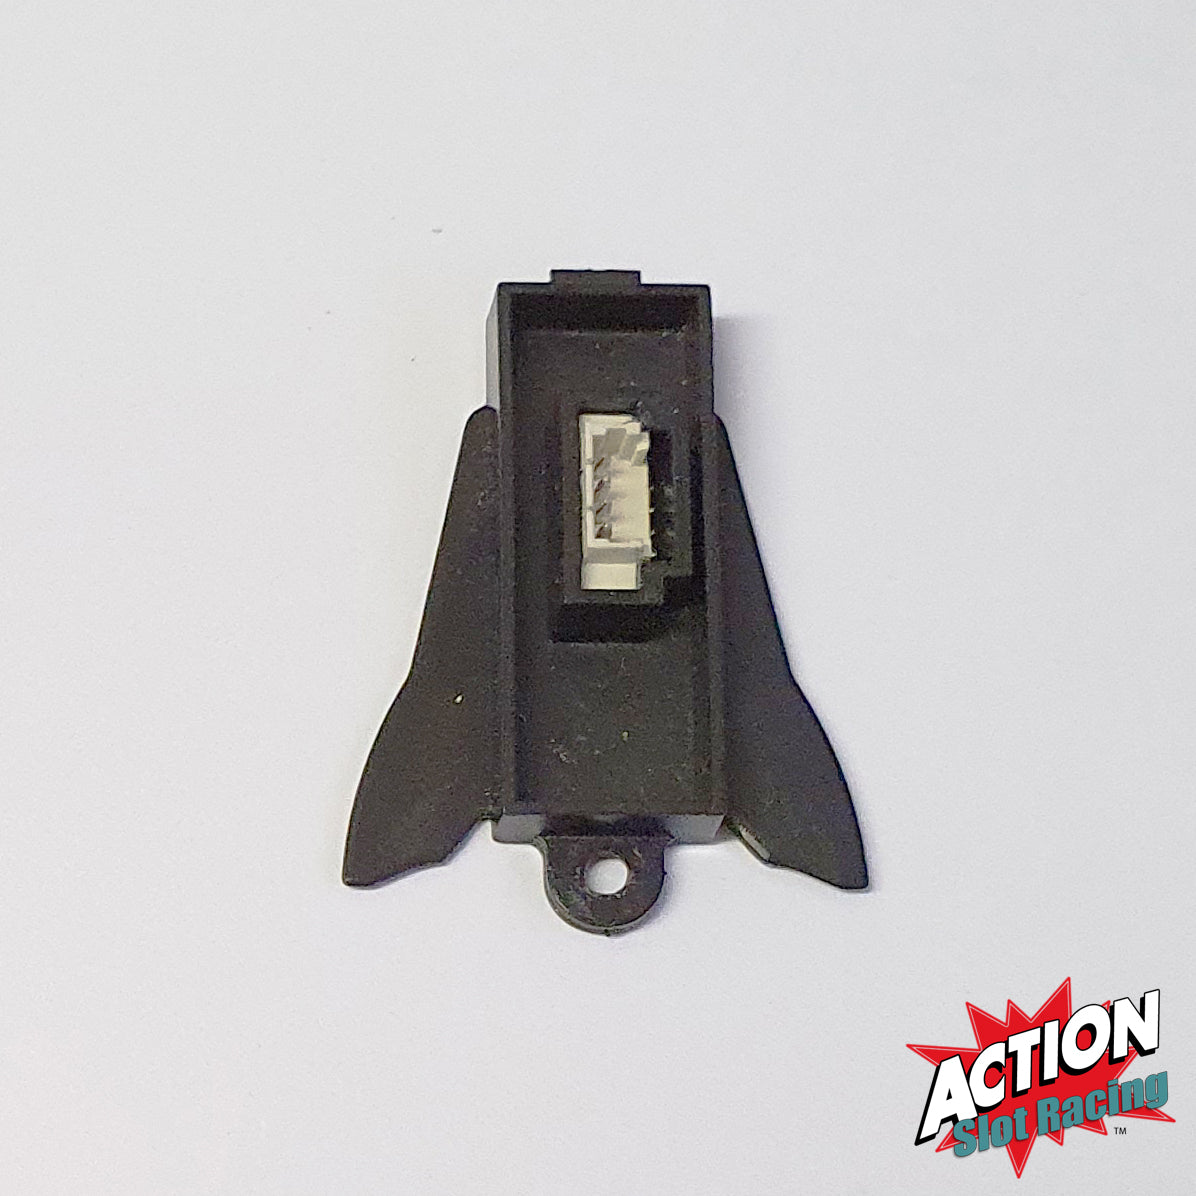 Scalextric 1:32 F1 Replaces Digital Plug Plate To DPR Analogue - Wide Fin